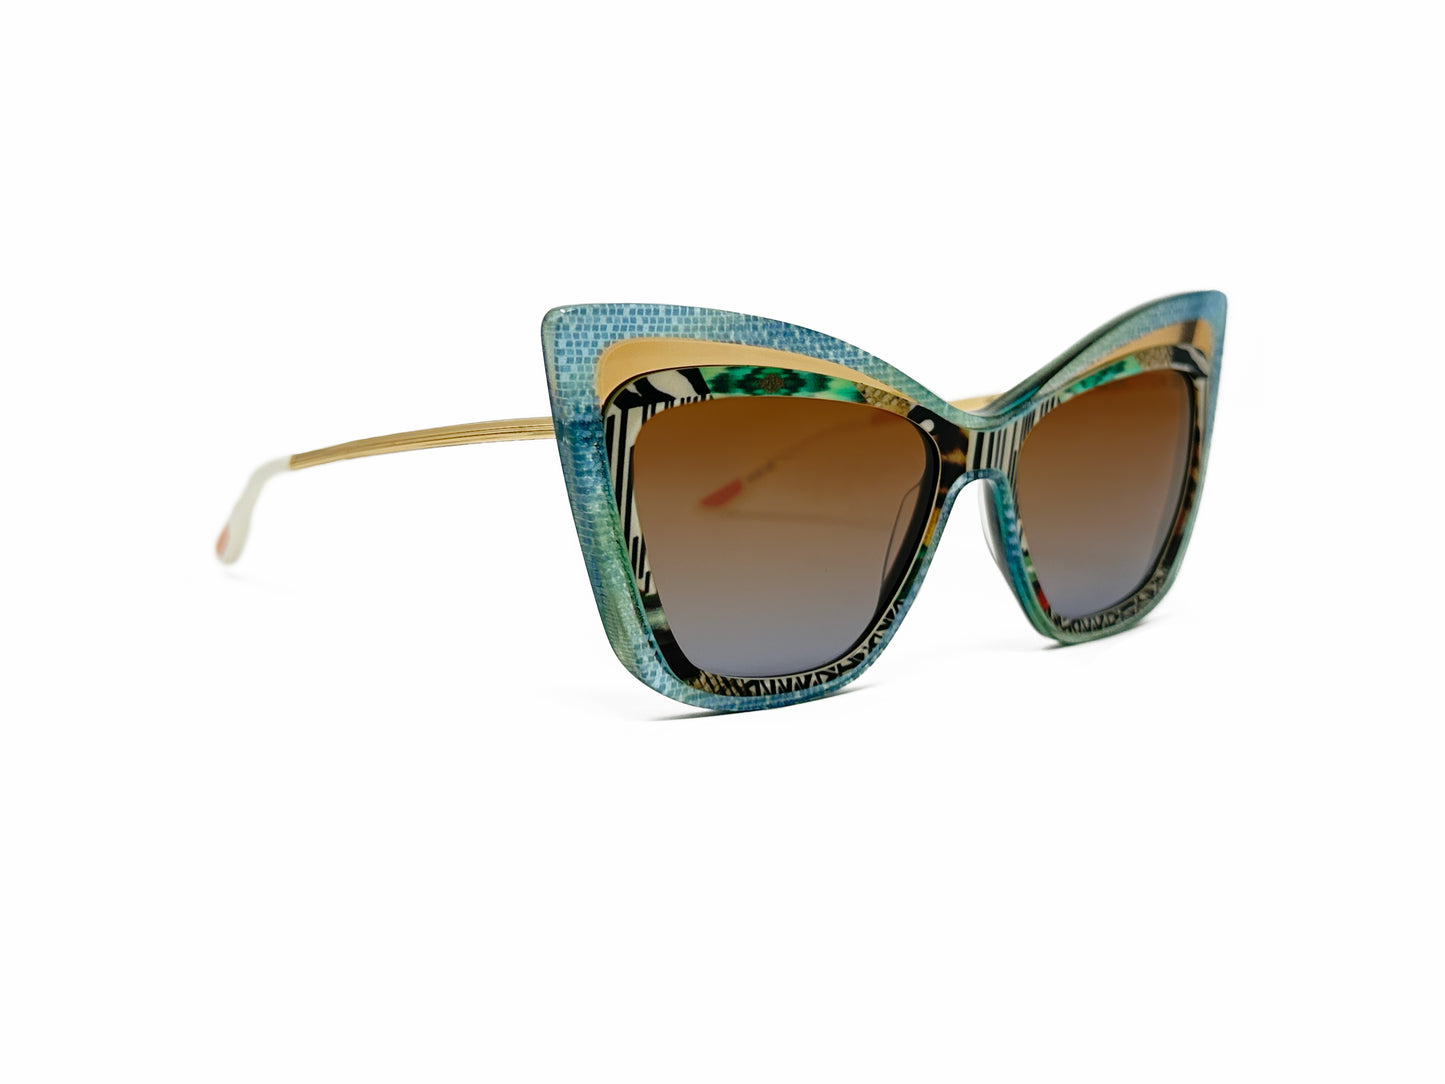 Christian Roth acetate cat-eye sunglasses. Model: Rock 'n Roth. Color: Blu - Blue tile pattern, yellow, and animal print. Side view.